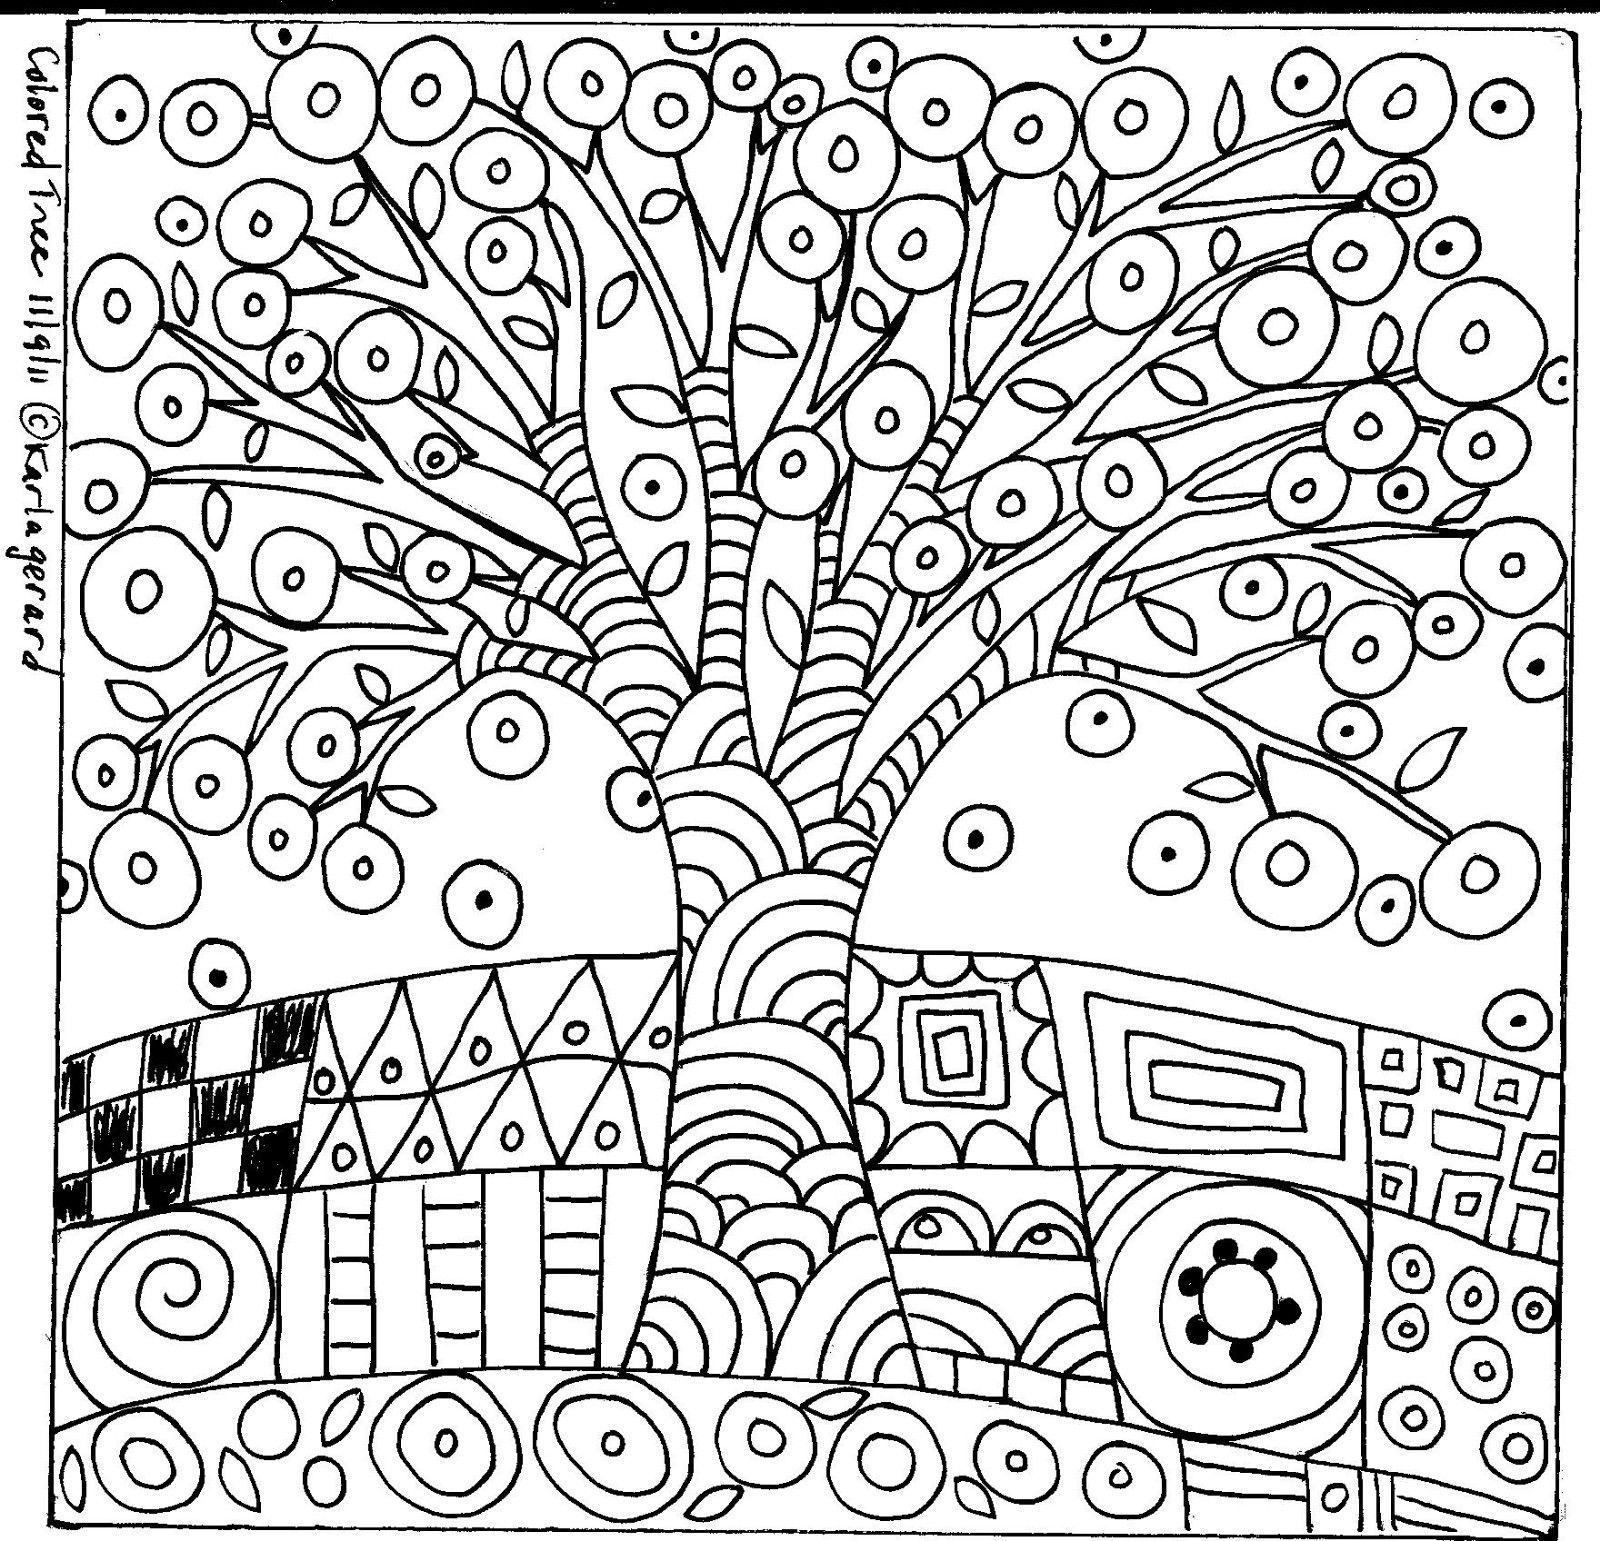 folk art coloring pages - High Quality Coloring Pages